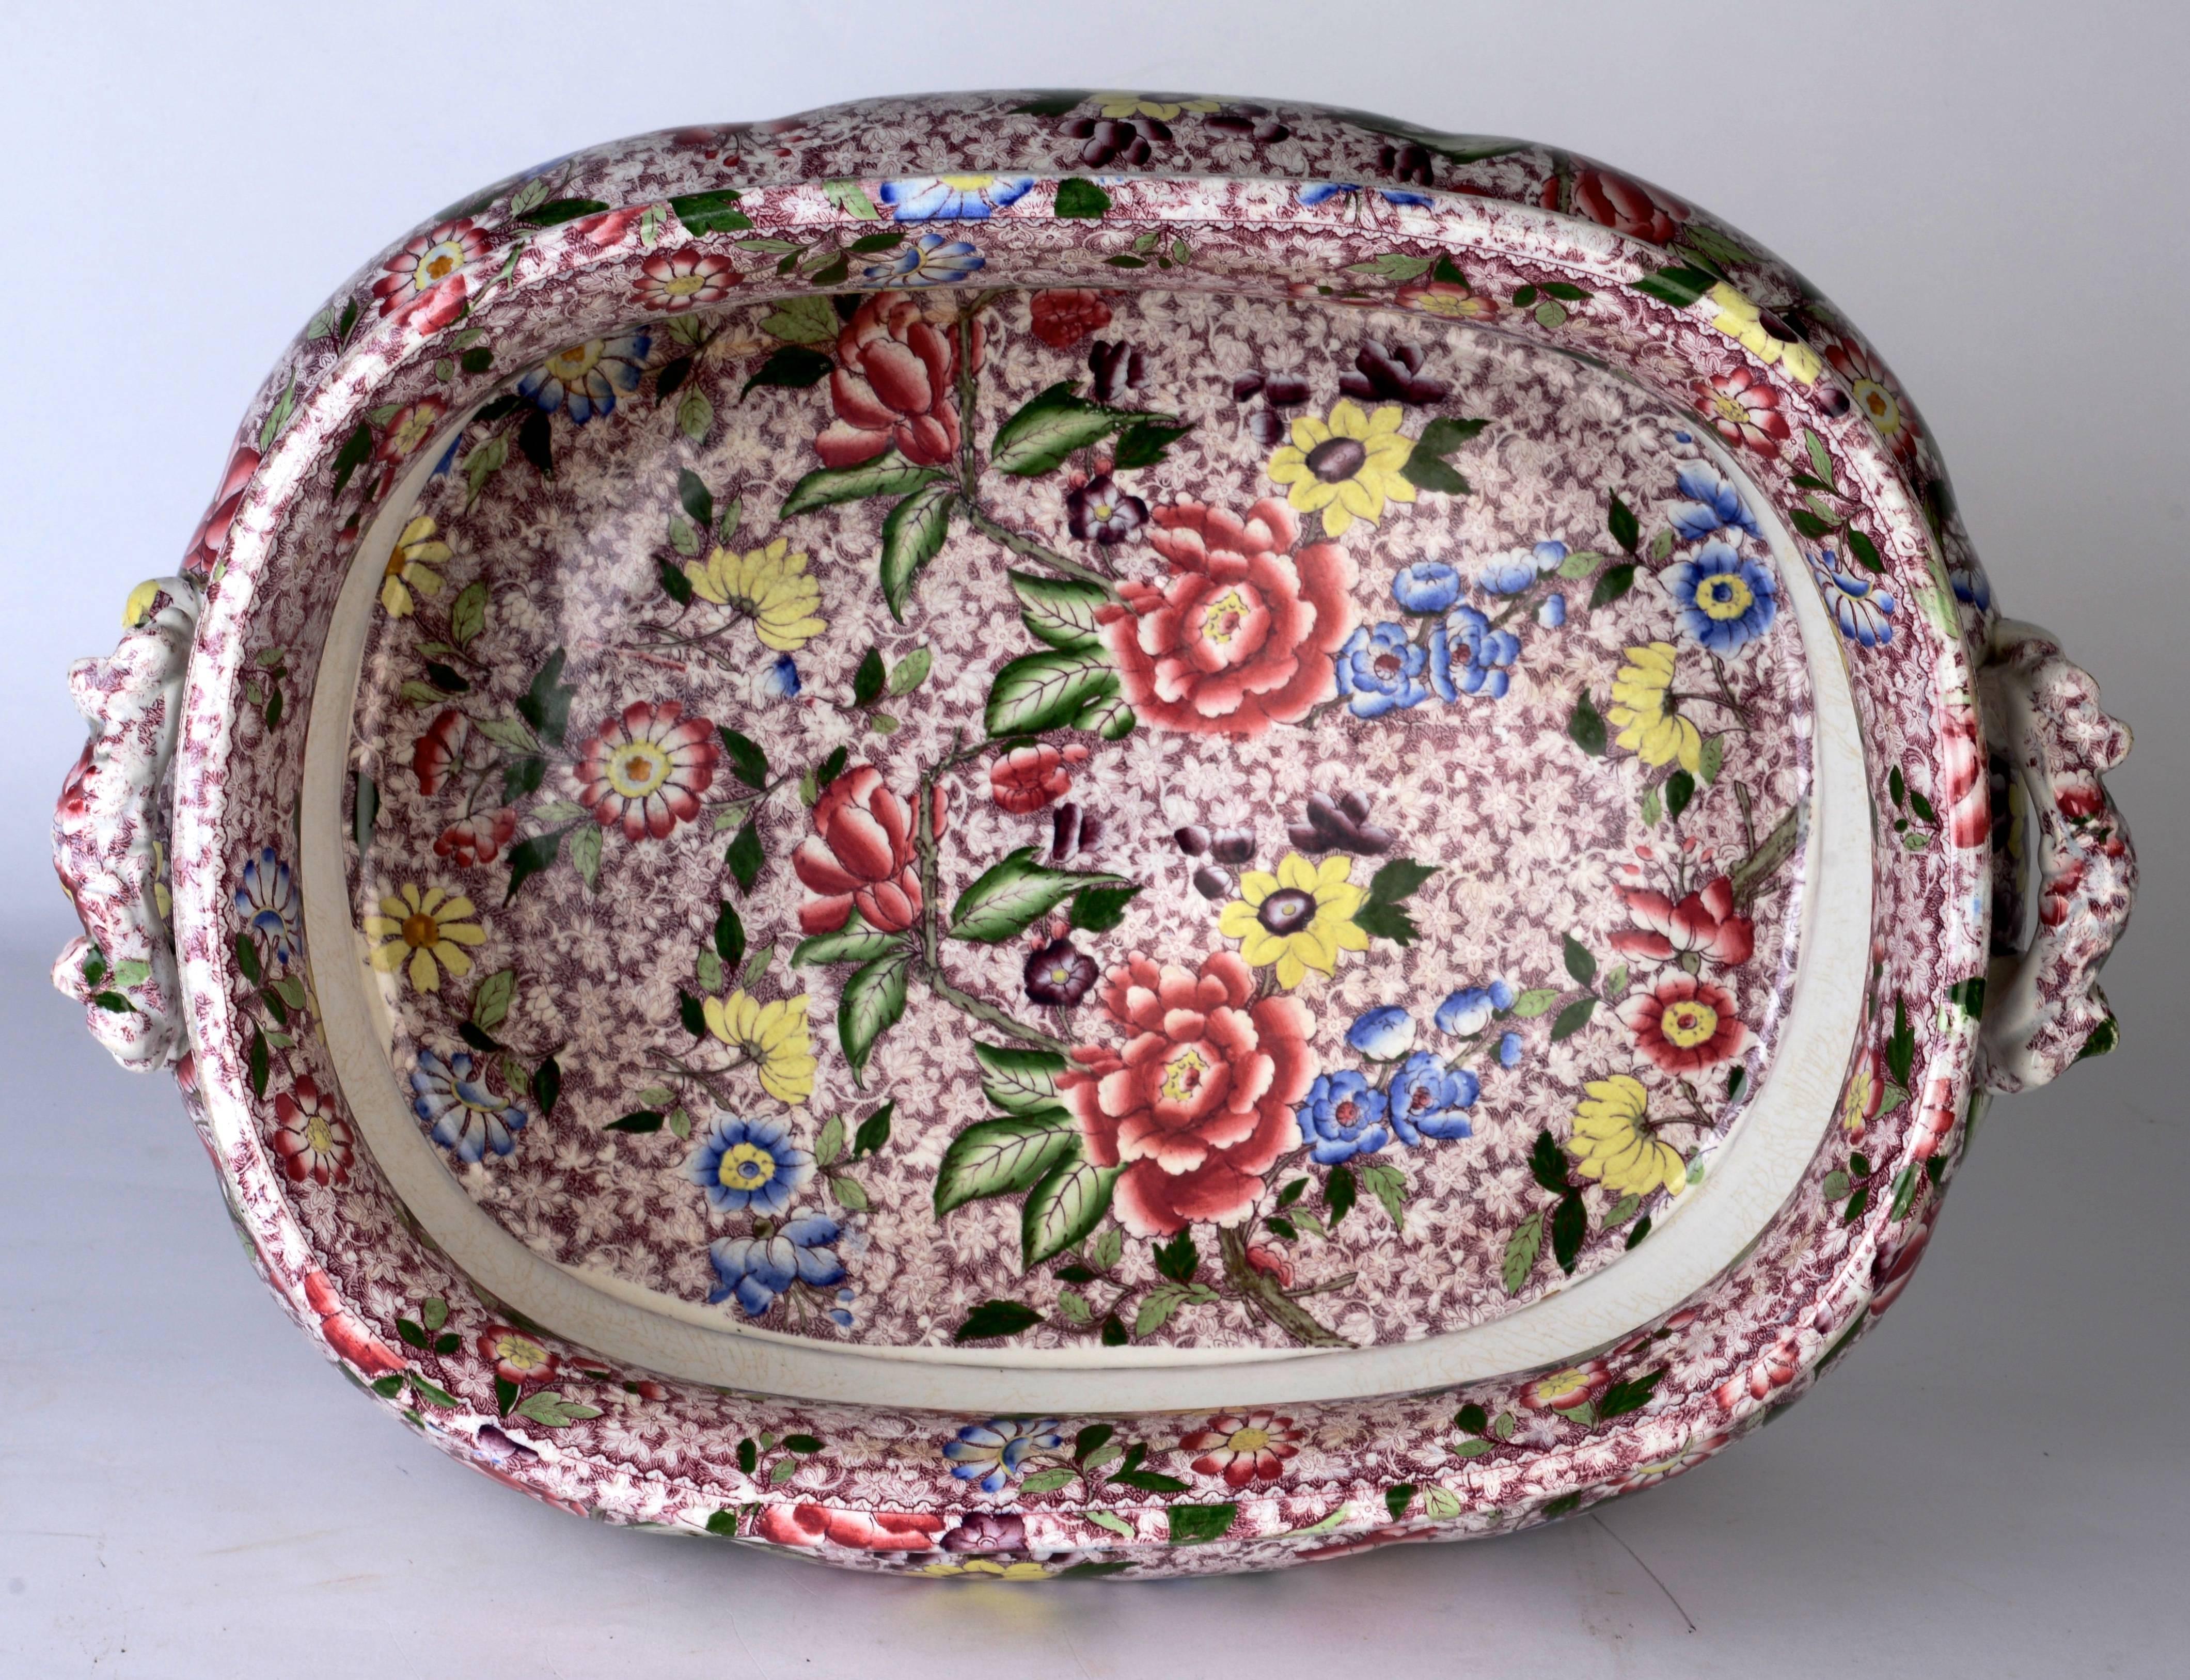 Victorian, transfer printed and hand-painted, ironstone foot bath, circa 1880 with decorative molded handles, unusual pink chintz transfer pattern with fine grace and movement accented by defined brushstrokes in brilliant colors, it is unusually